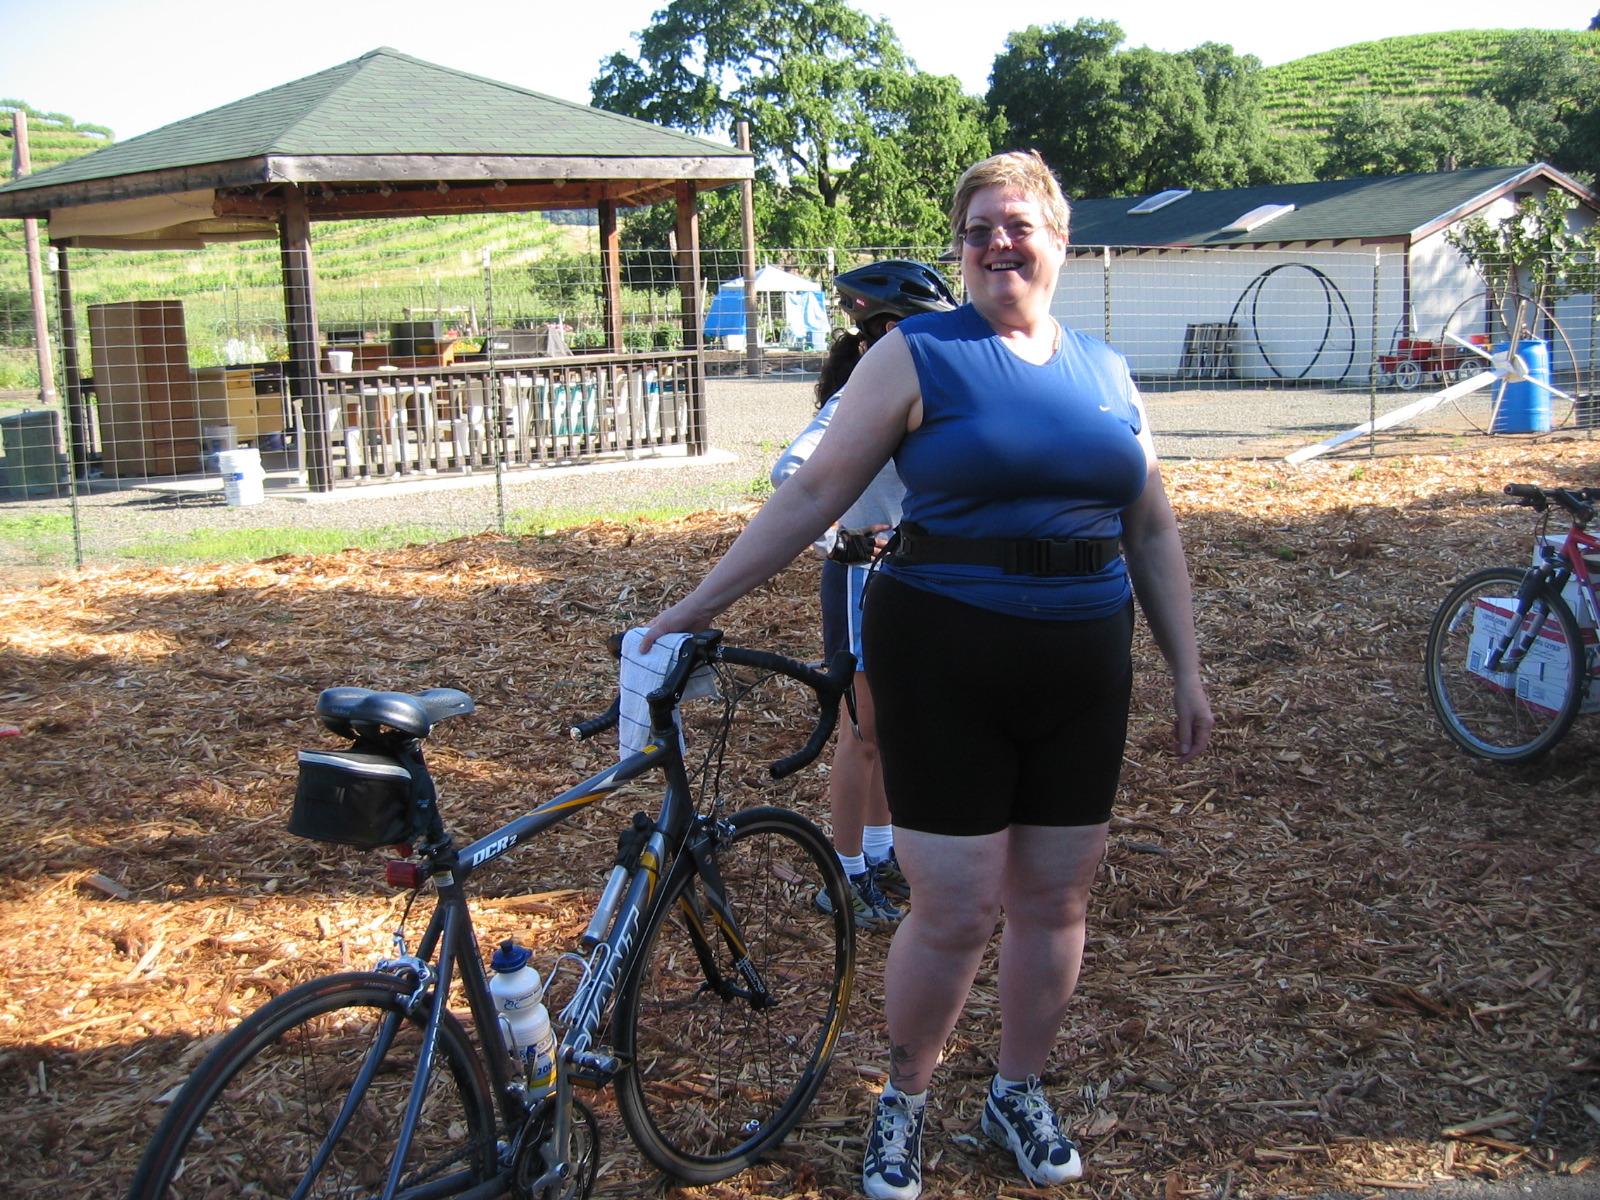 Jacqueline - Diabetic and rode the 25 miler, right on!